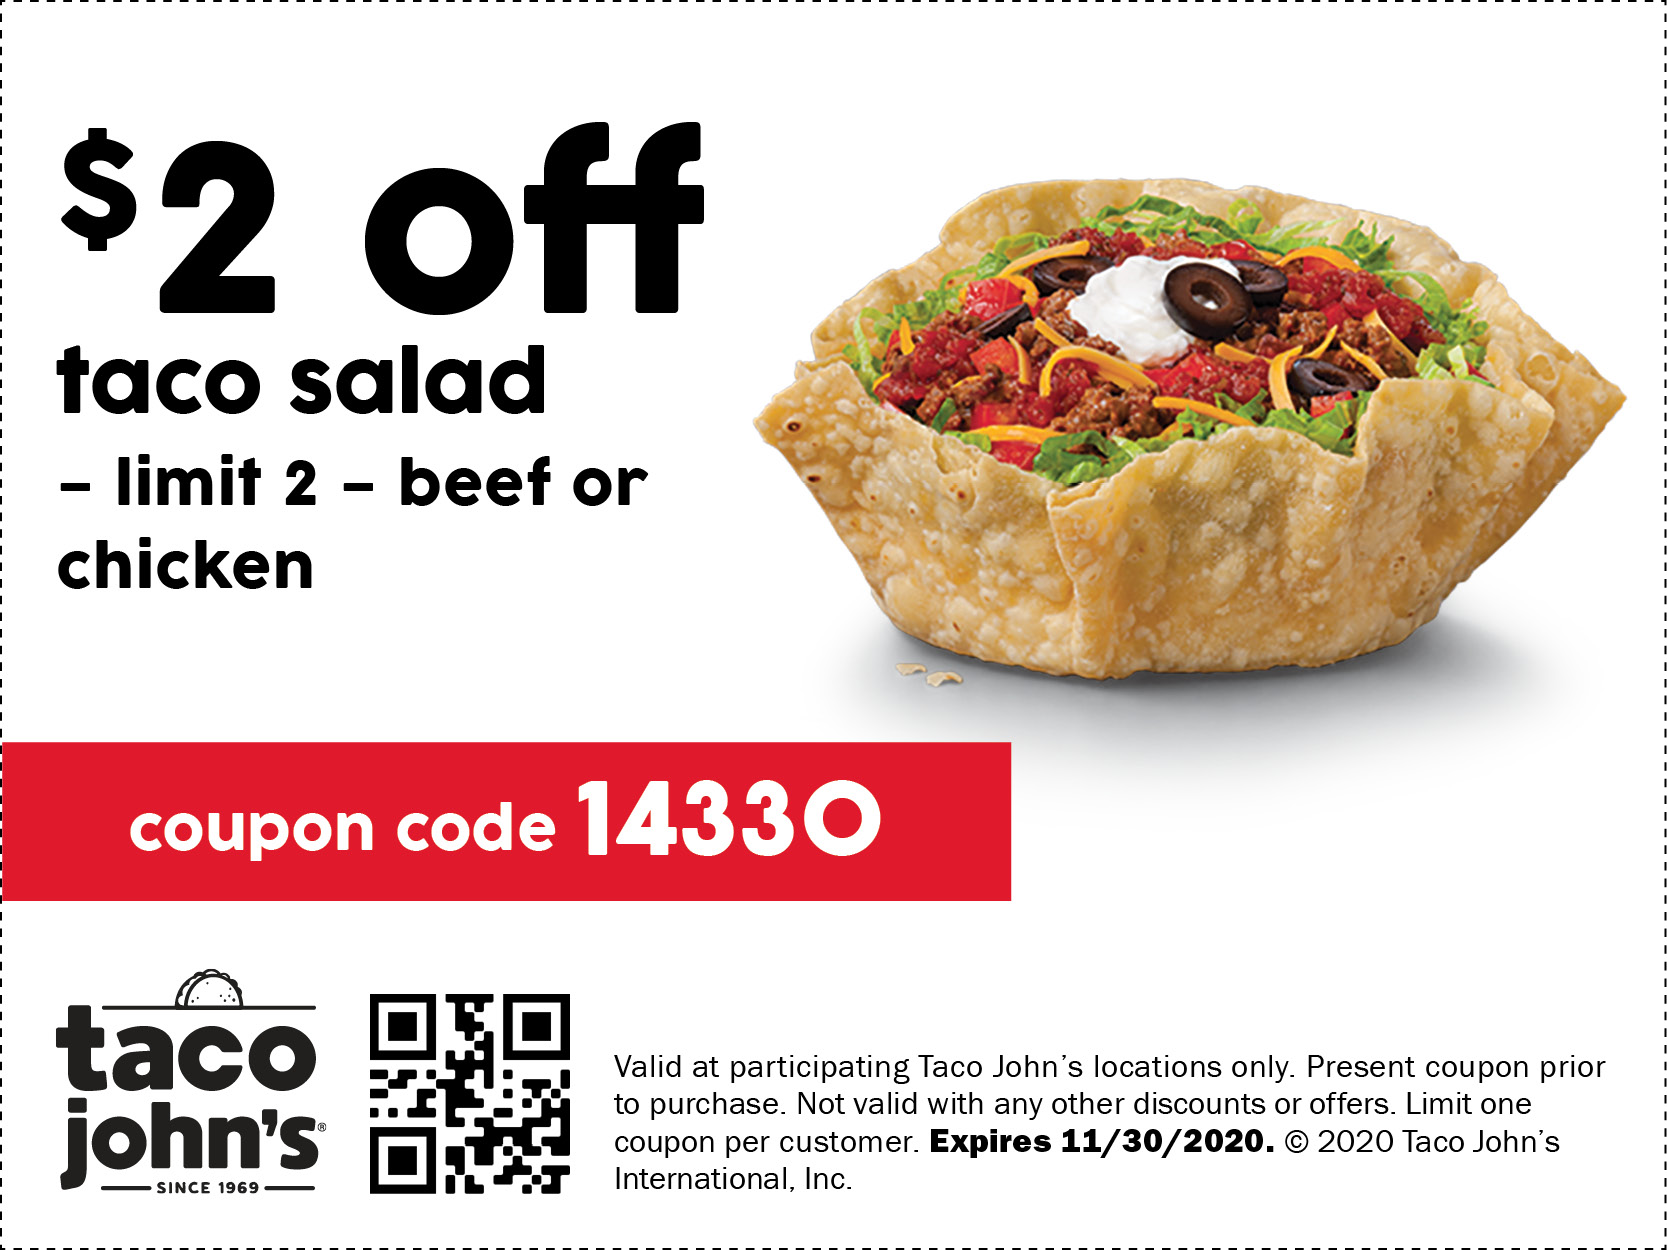 Coupons Offers And Promotions Taco John S